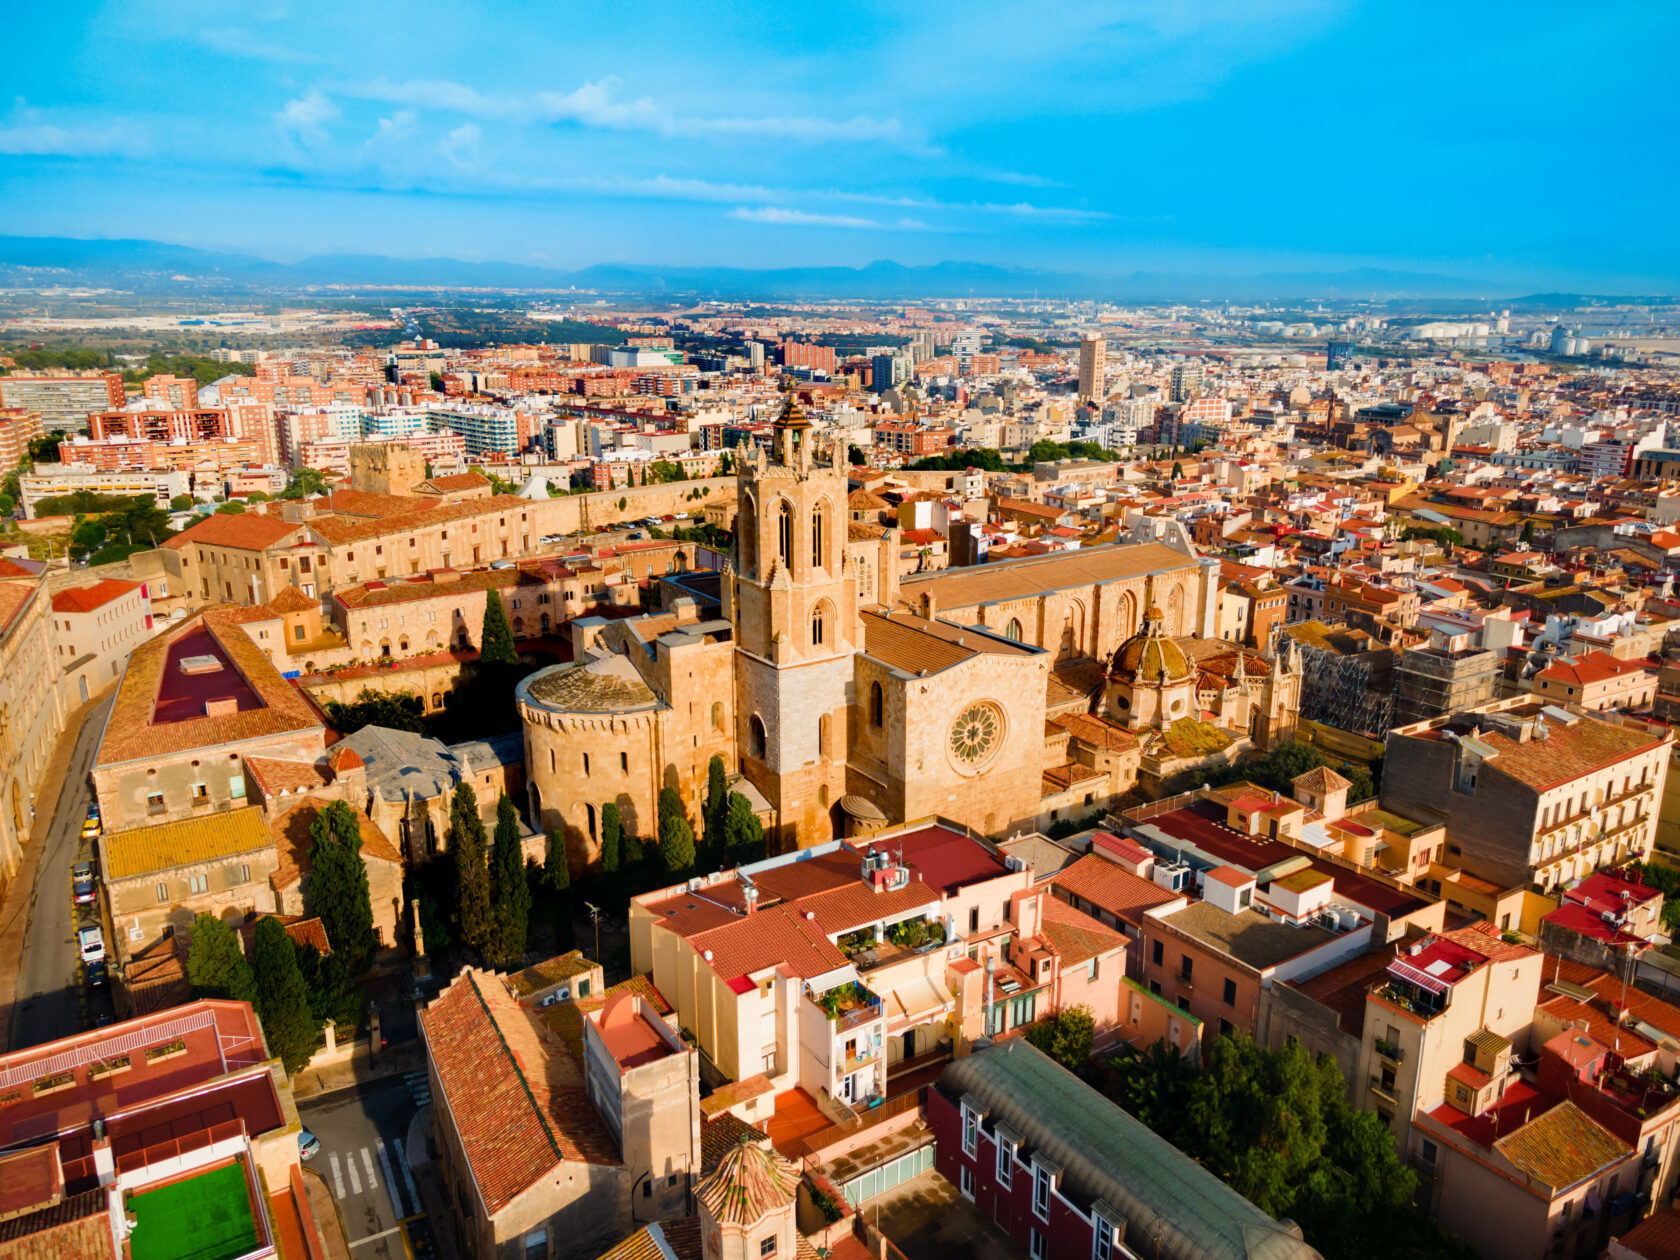 An aerial view of the Cathedral of Tarragona in Tarragona, Spain (an Atlantis site).